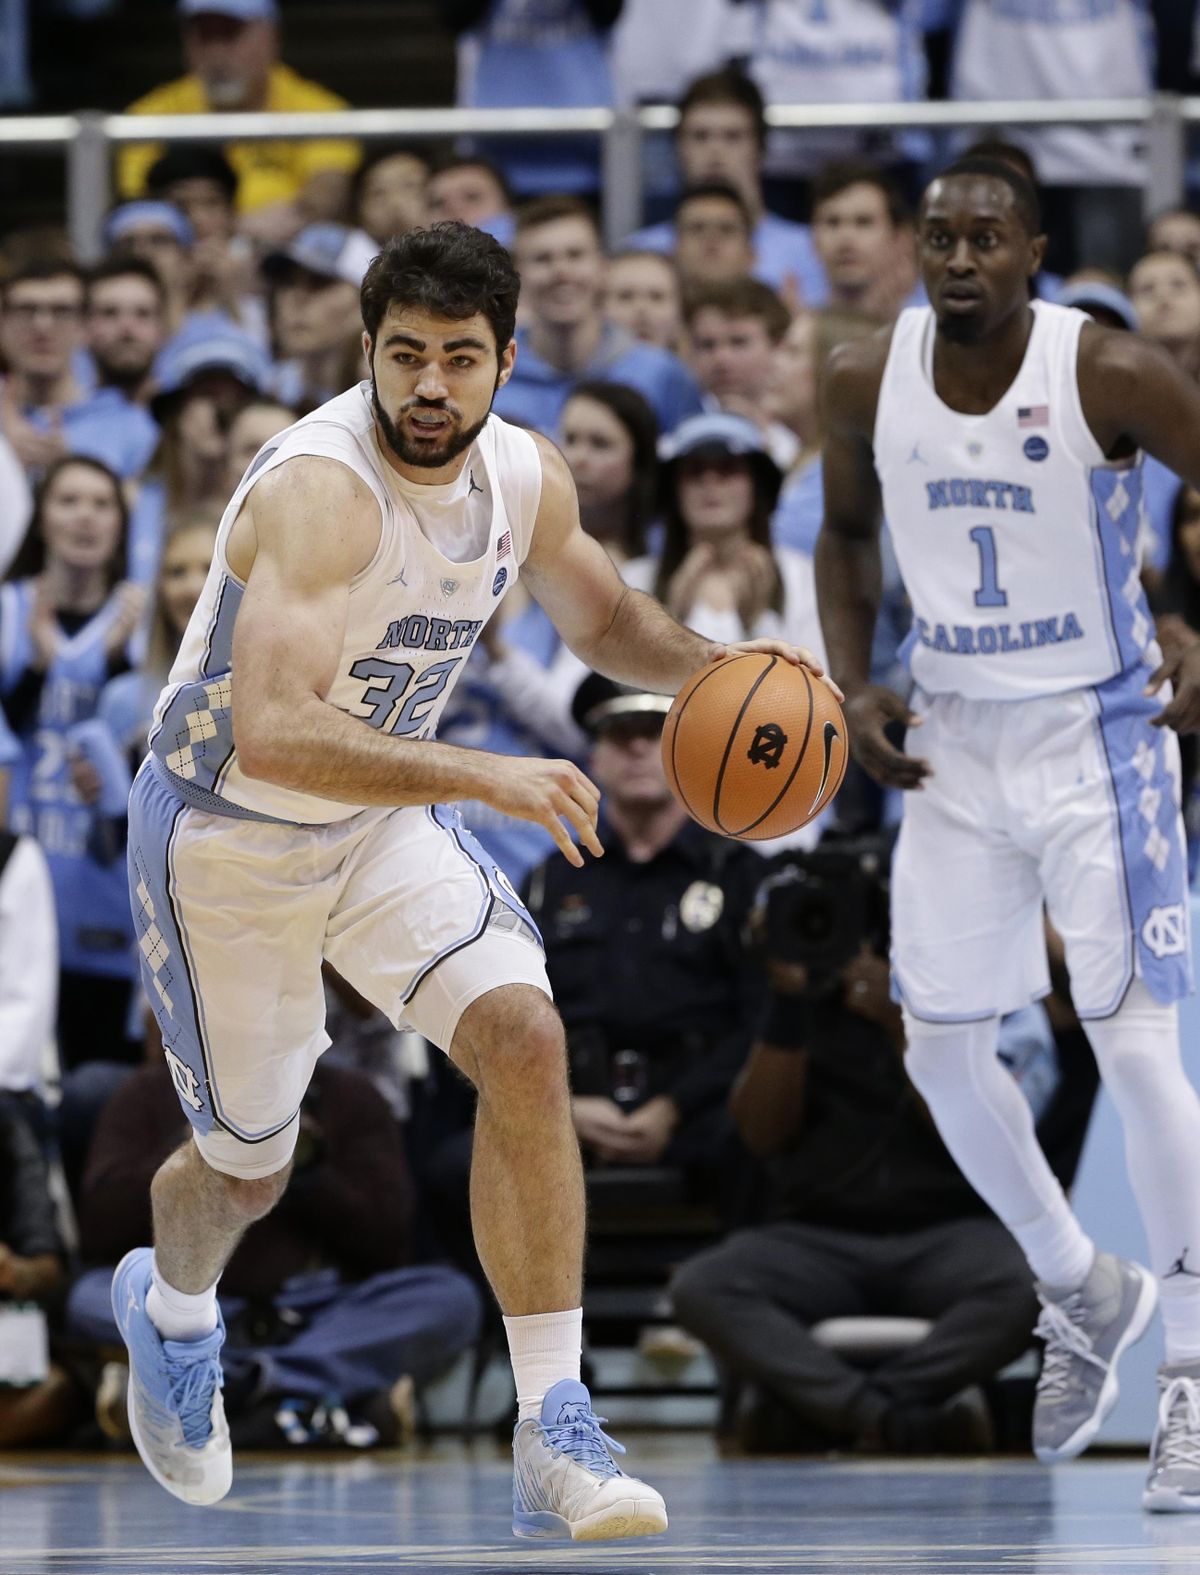 North Carolina’s Luke Maye  dribbles against Miami during the first half  in Chapel Hill, N.C., on  Feb. 27. (Gerry Broome / AP)